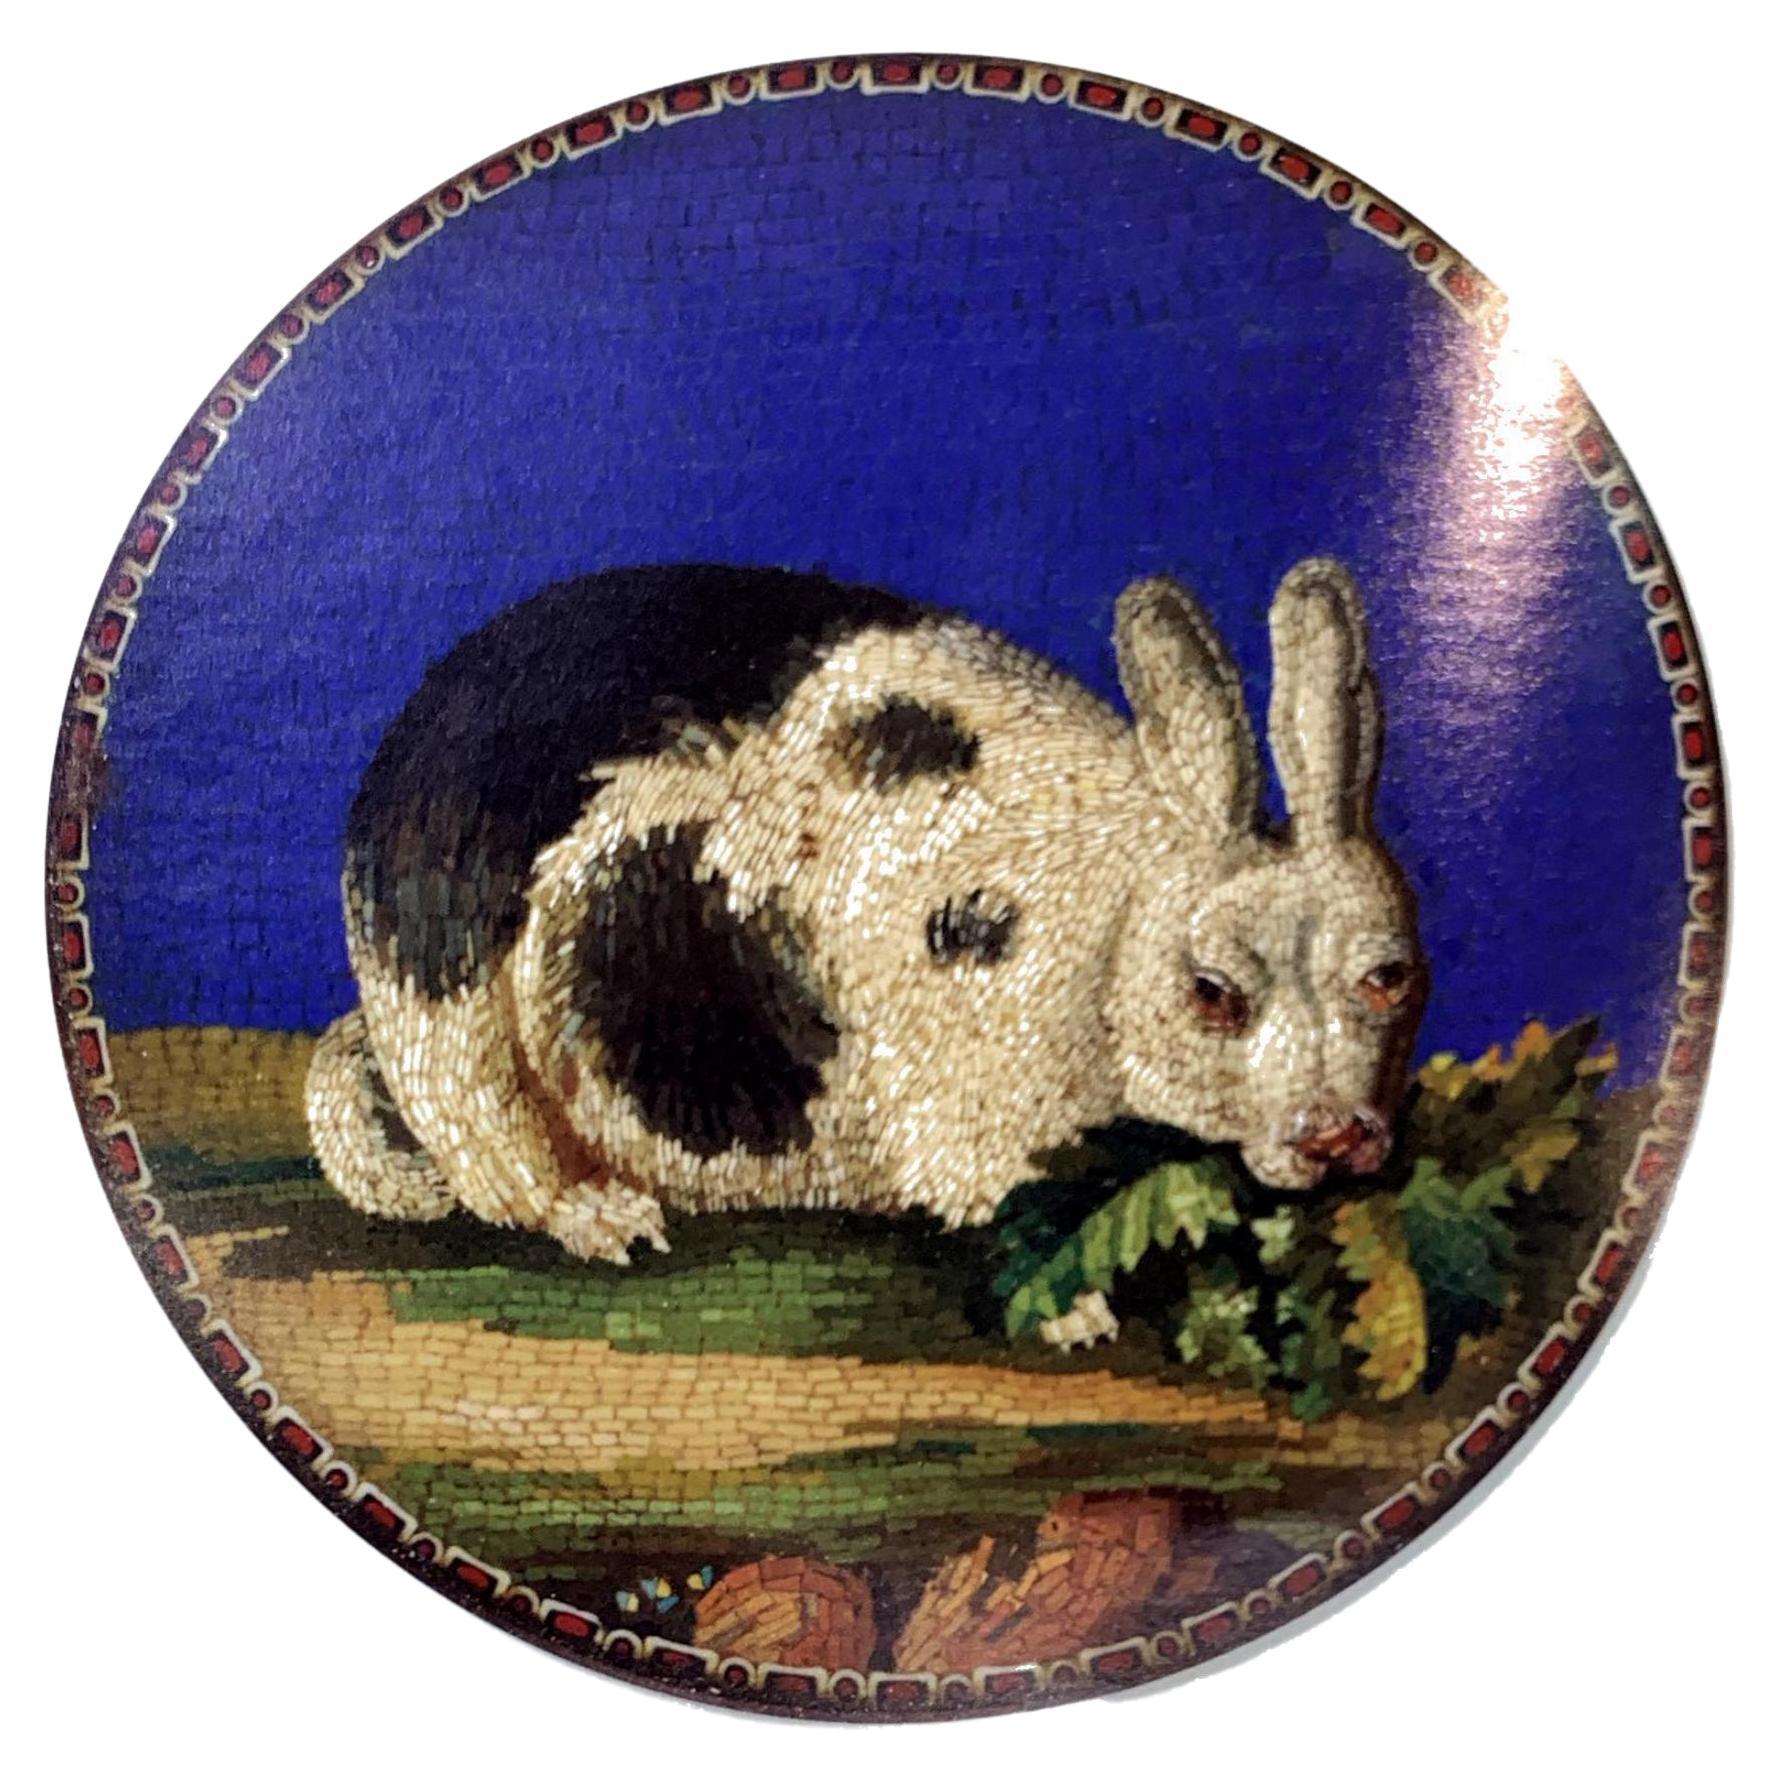 18th Century  Giacomo Raffaelli Micro Mosaic Rabbit Plaque

A micro mosaic depicting a fat rabbit eating leaves set in a wooden frame. Made by the late 18th century mosaicist Giacomo Raffaelli.

Signed on the reverse Giacomo Raffaelli, Roma